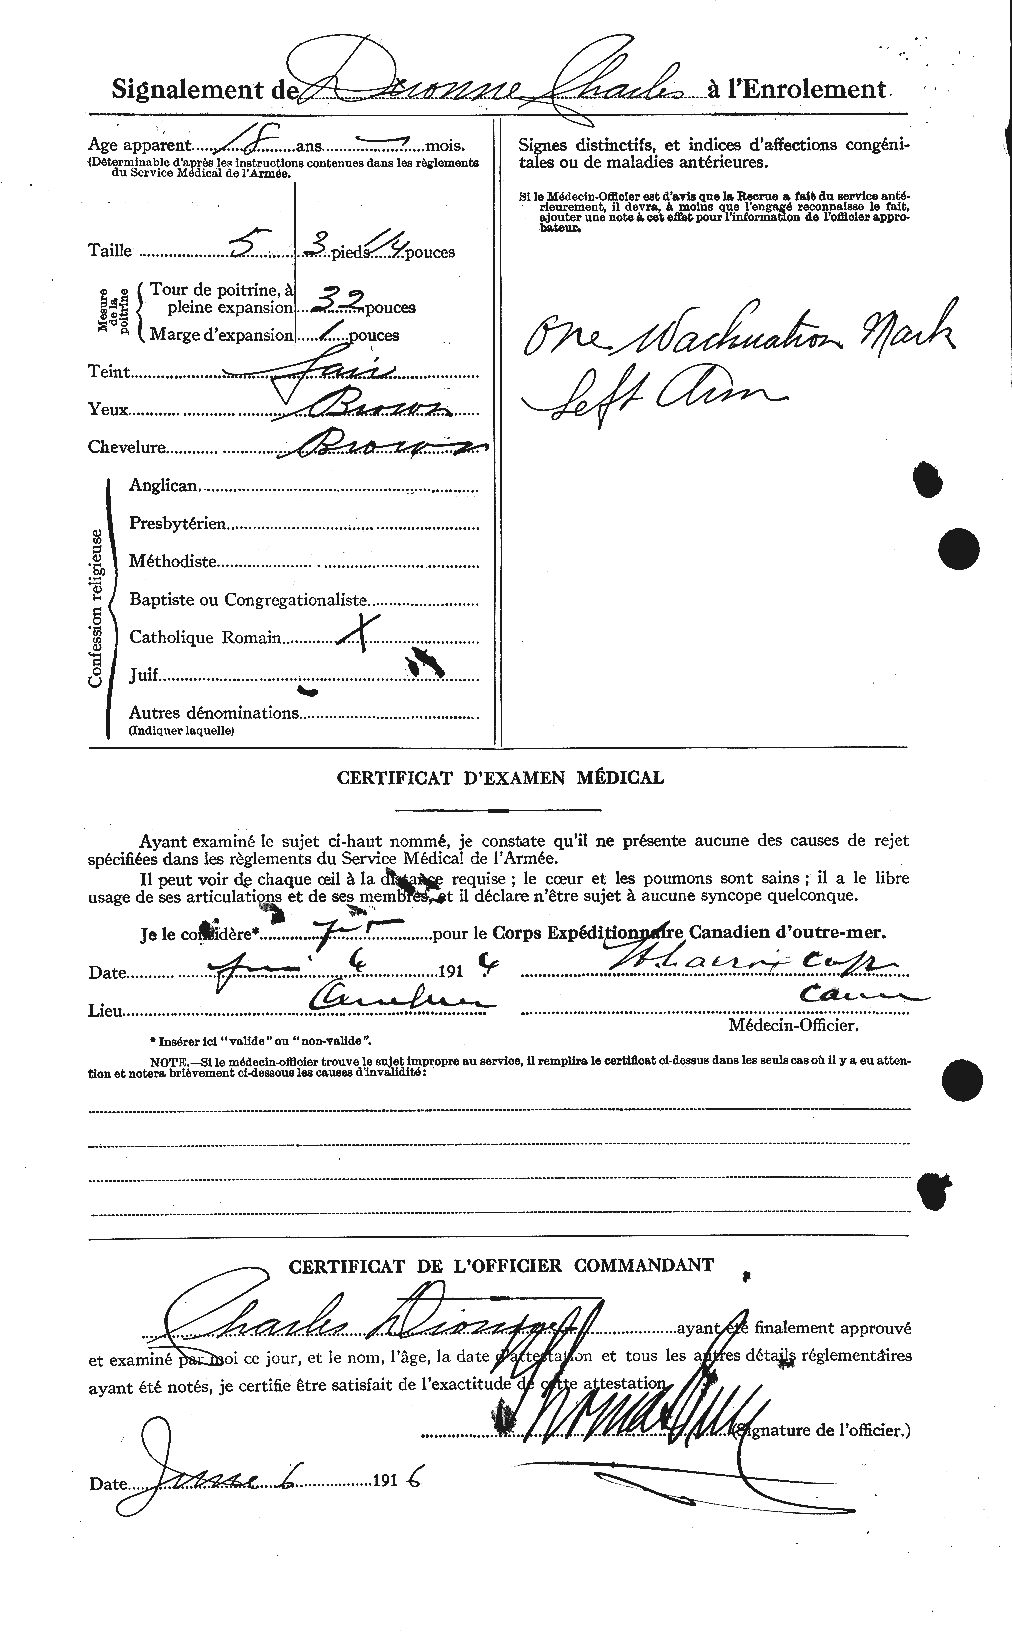 Personnel Records of the First World War - CEF 292565b